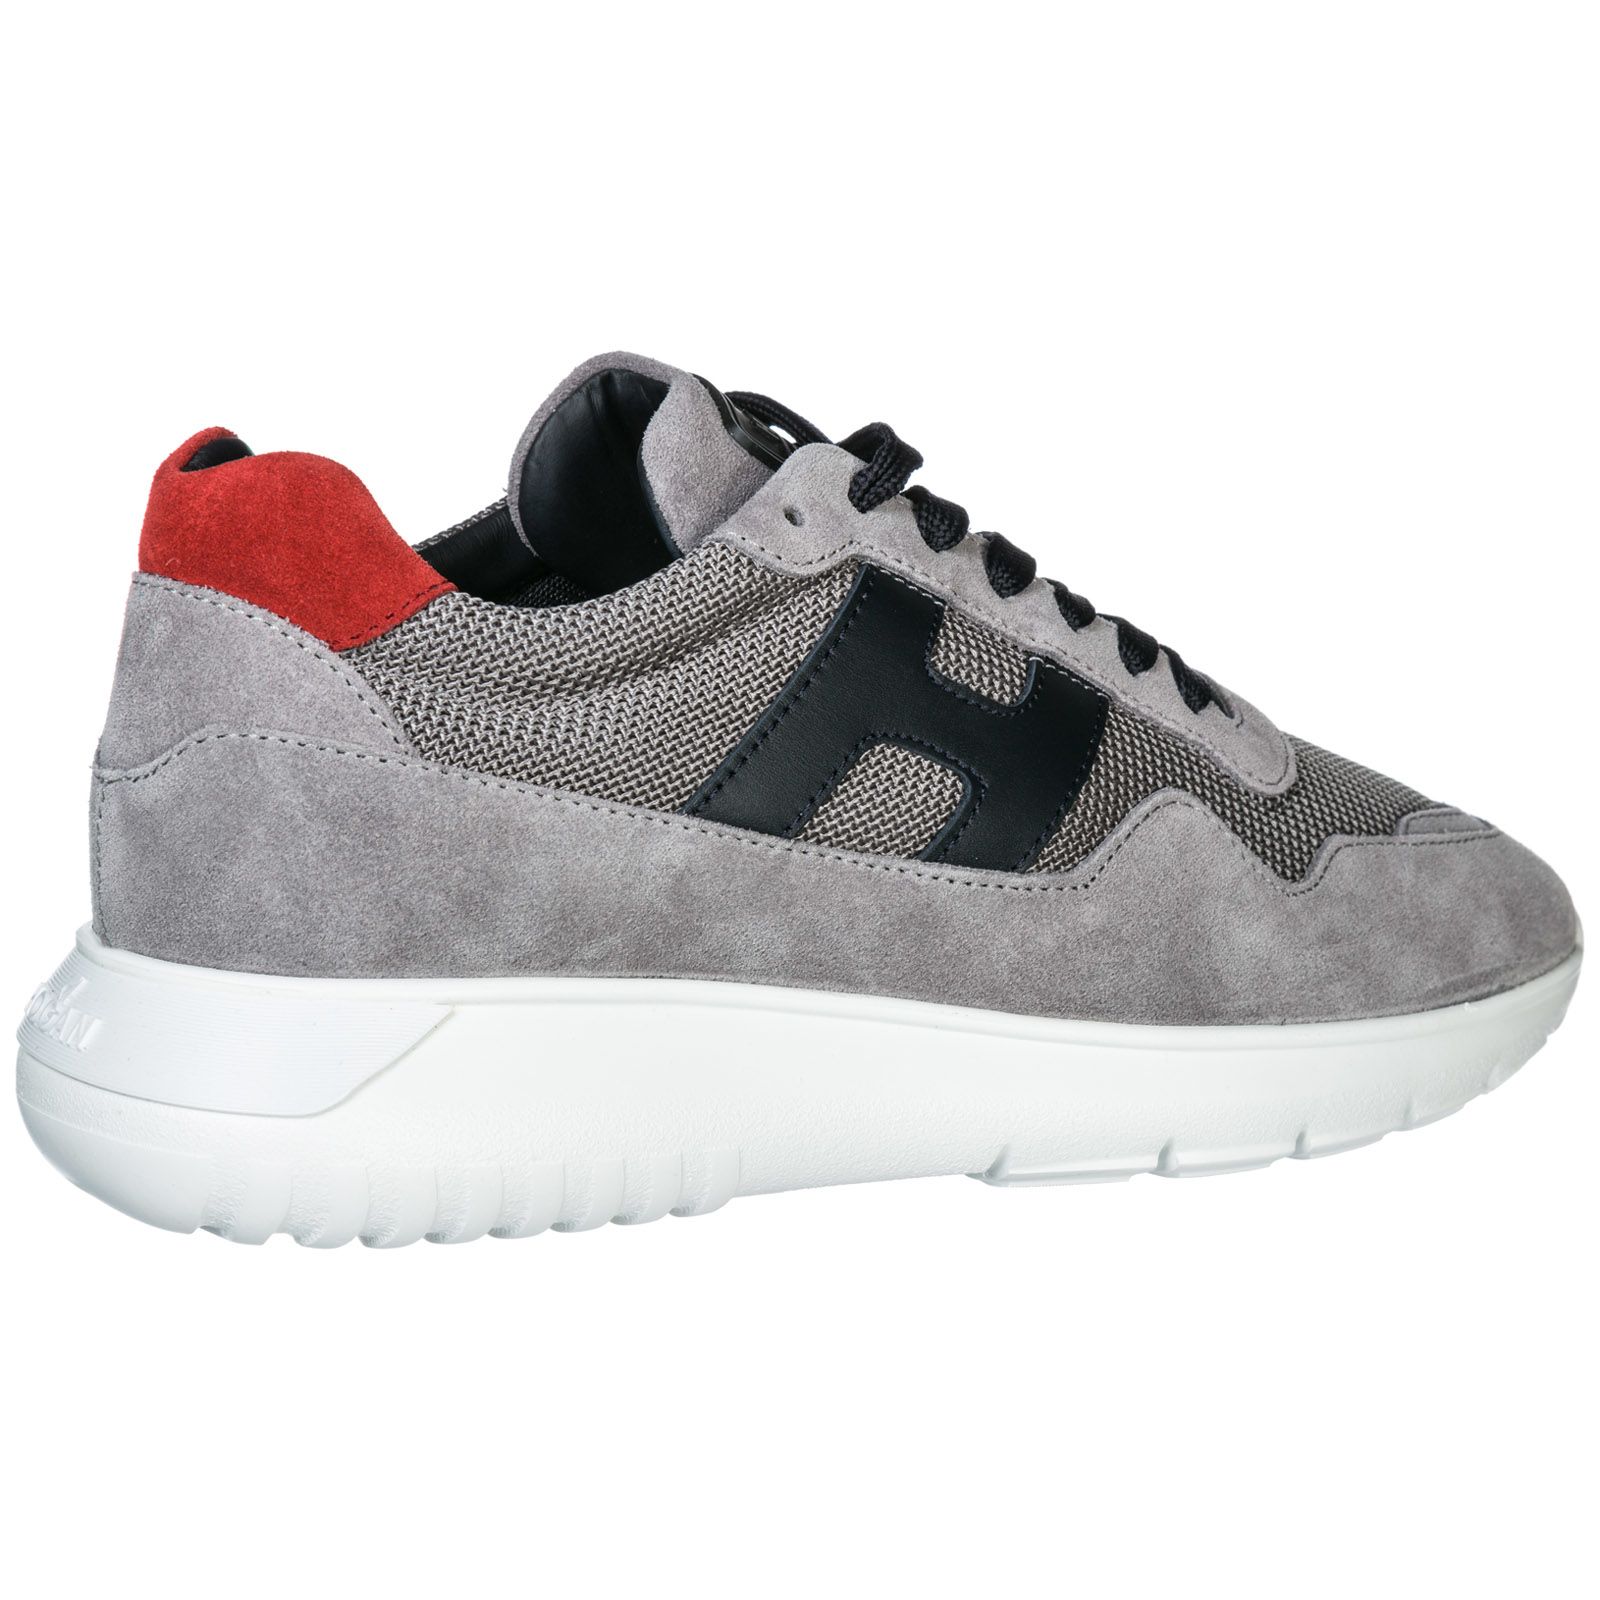 Hogan Hogan Shoes Suede Trainers Sneakers Interactive3 - Gray ...